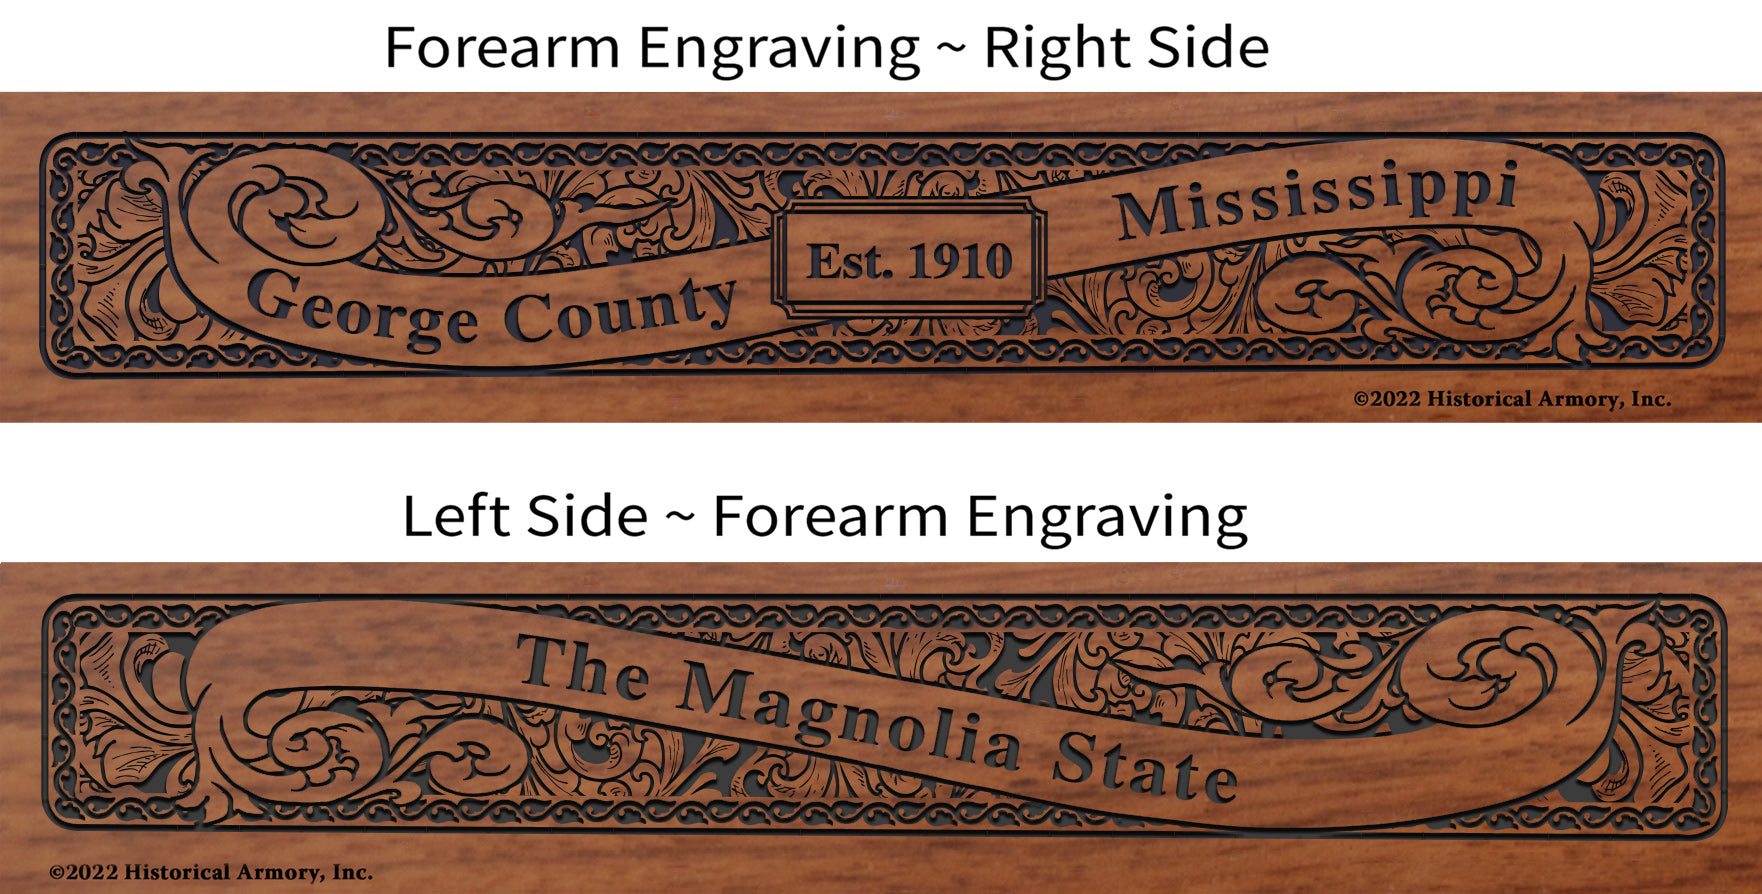 George County Mississippi Engraved Rifle Forearm